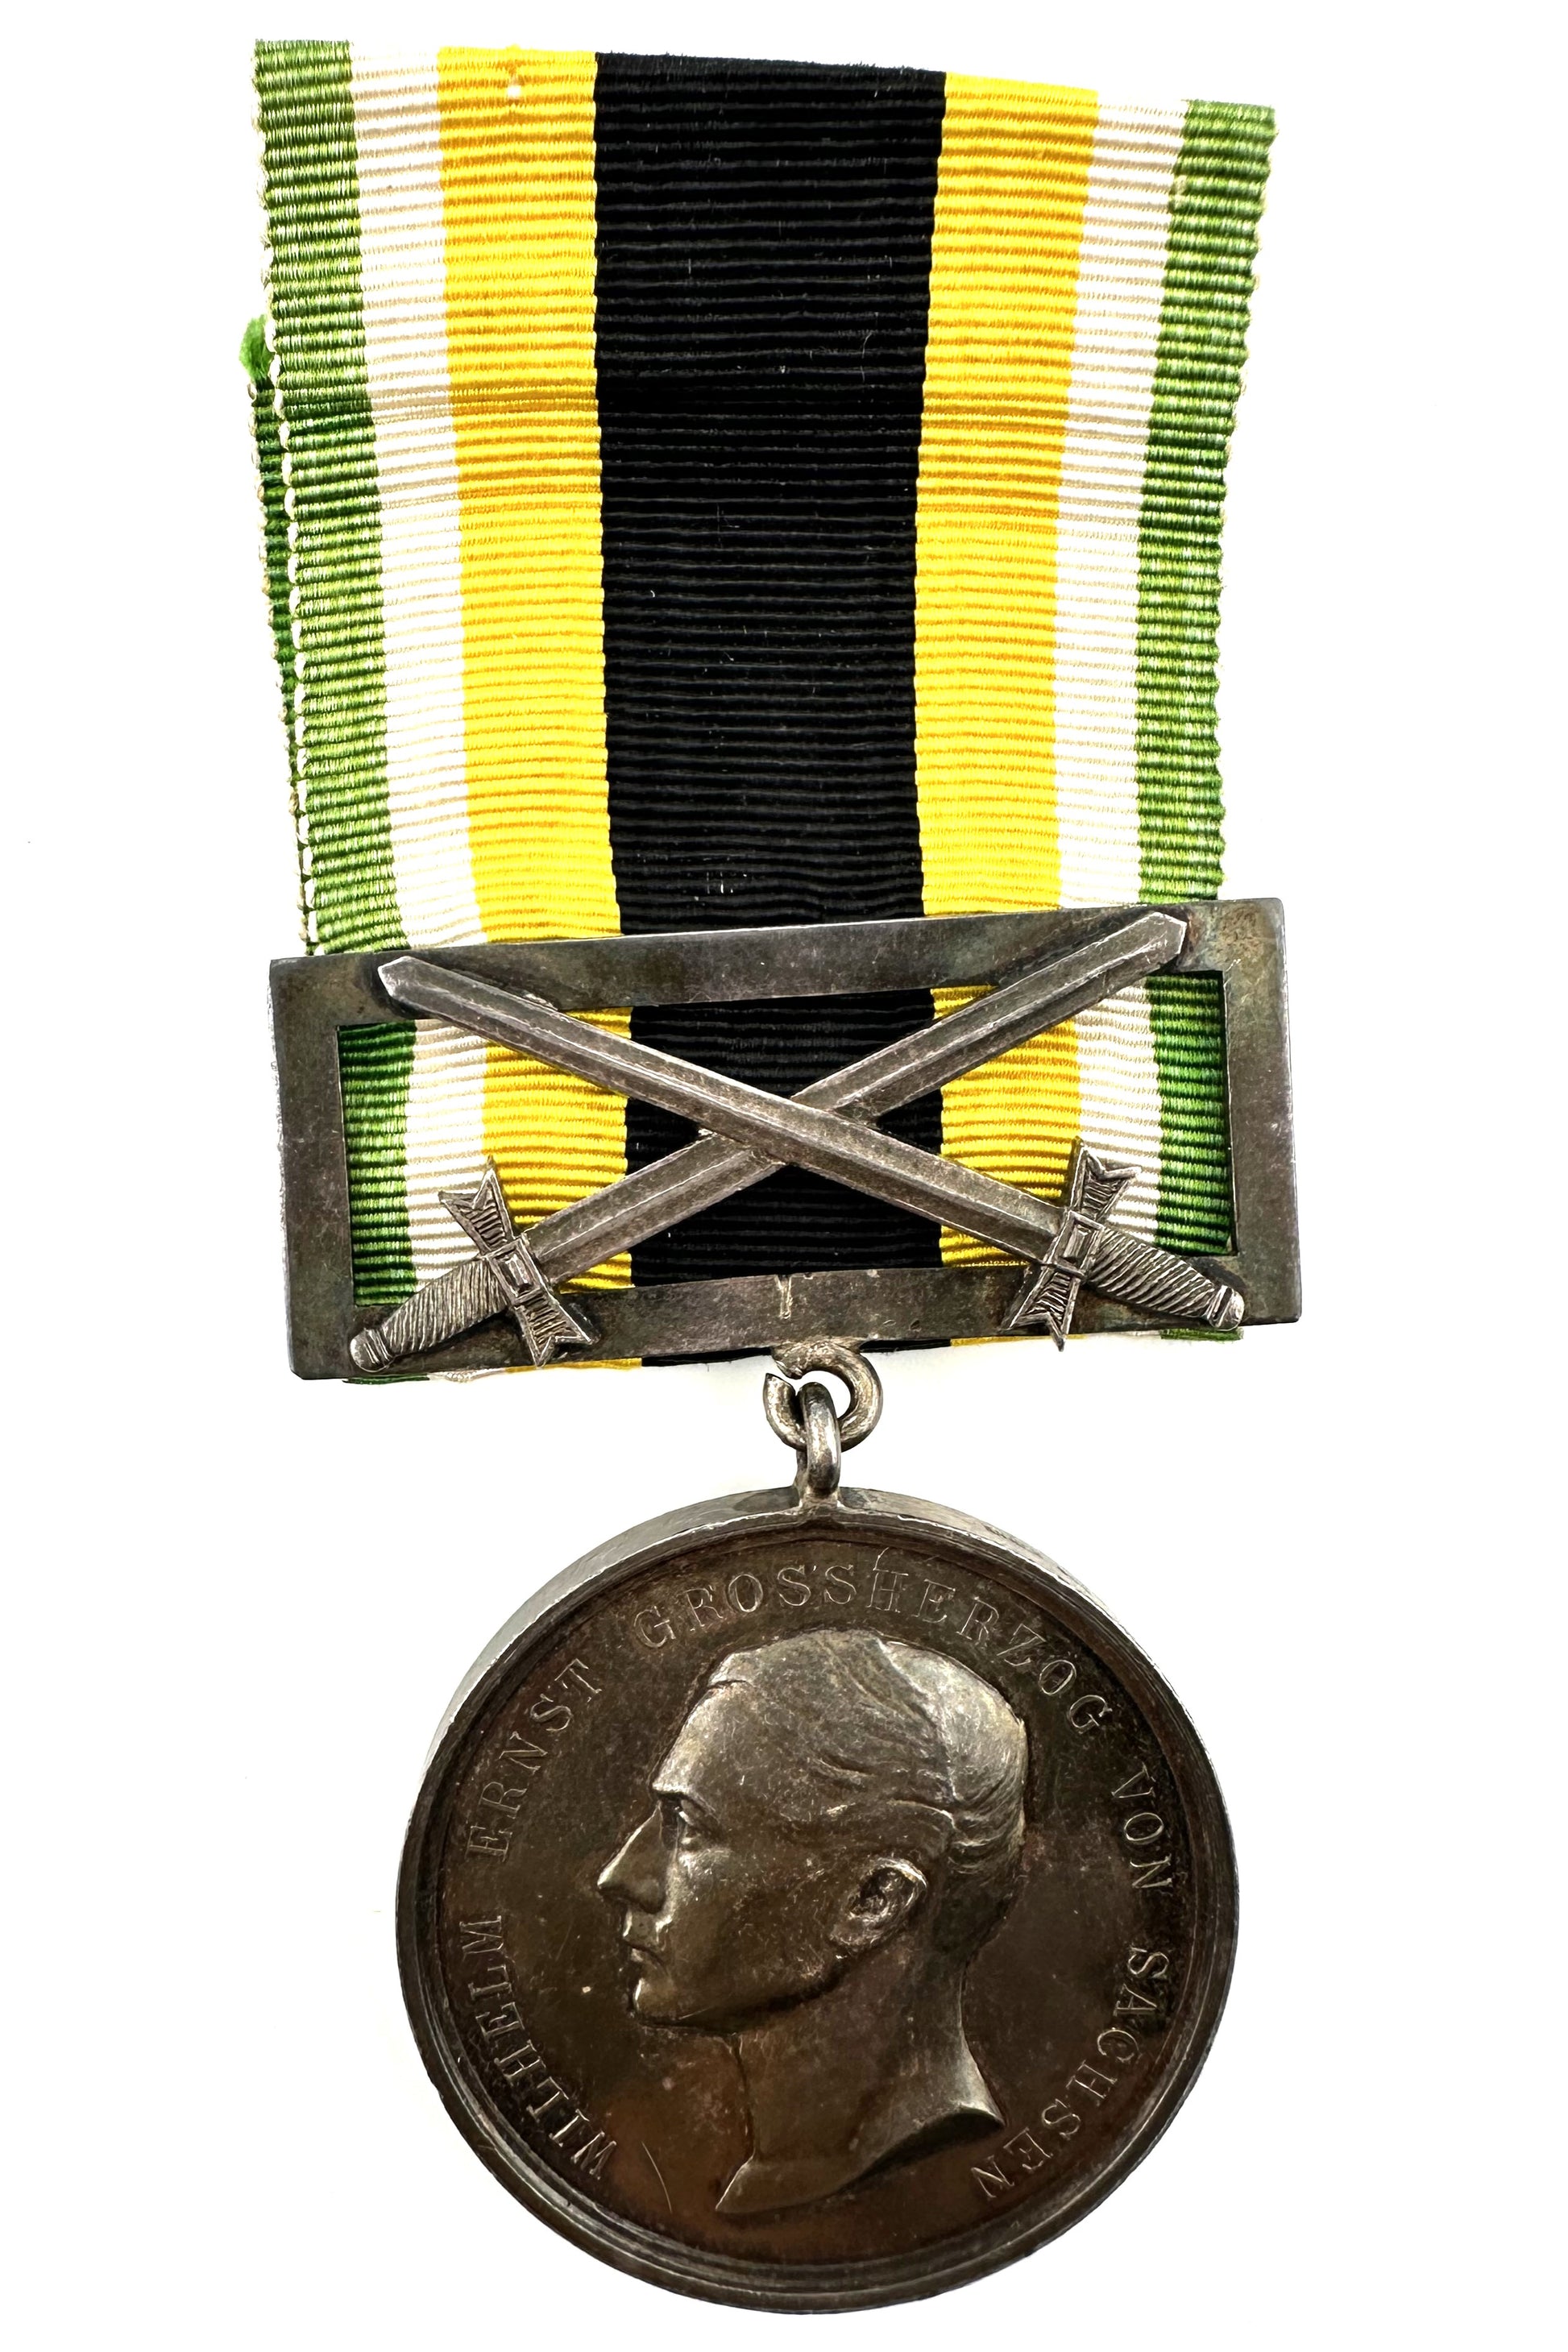 Saxe-Weimar Military Service Medal with Clasp - Derrittmeister Militaria Group